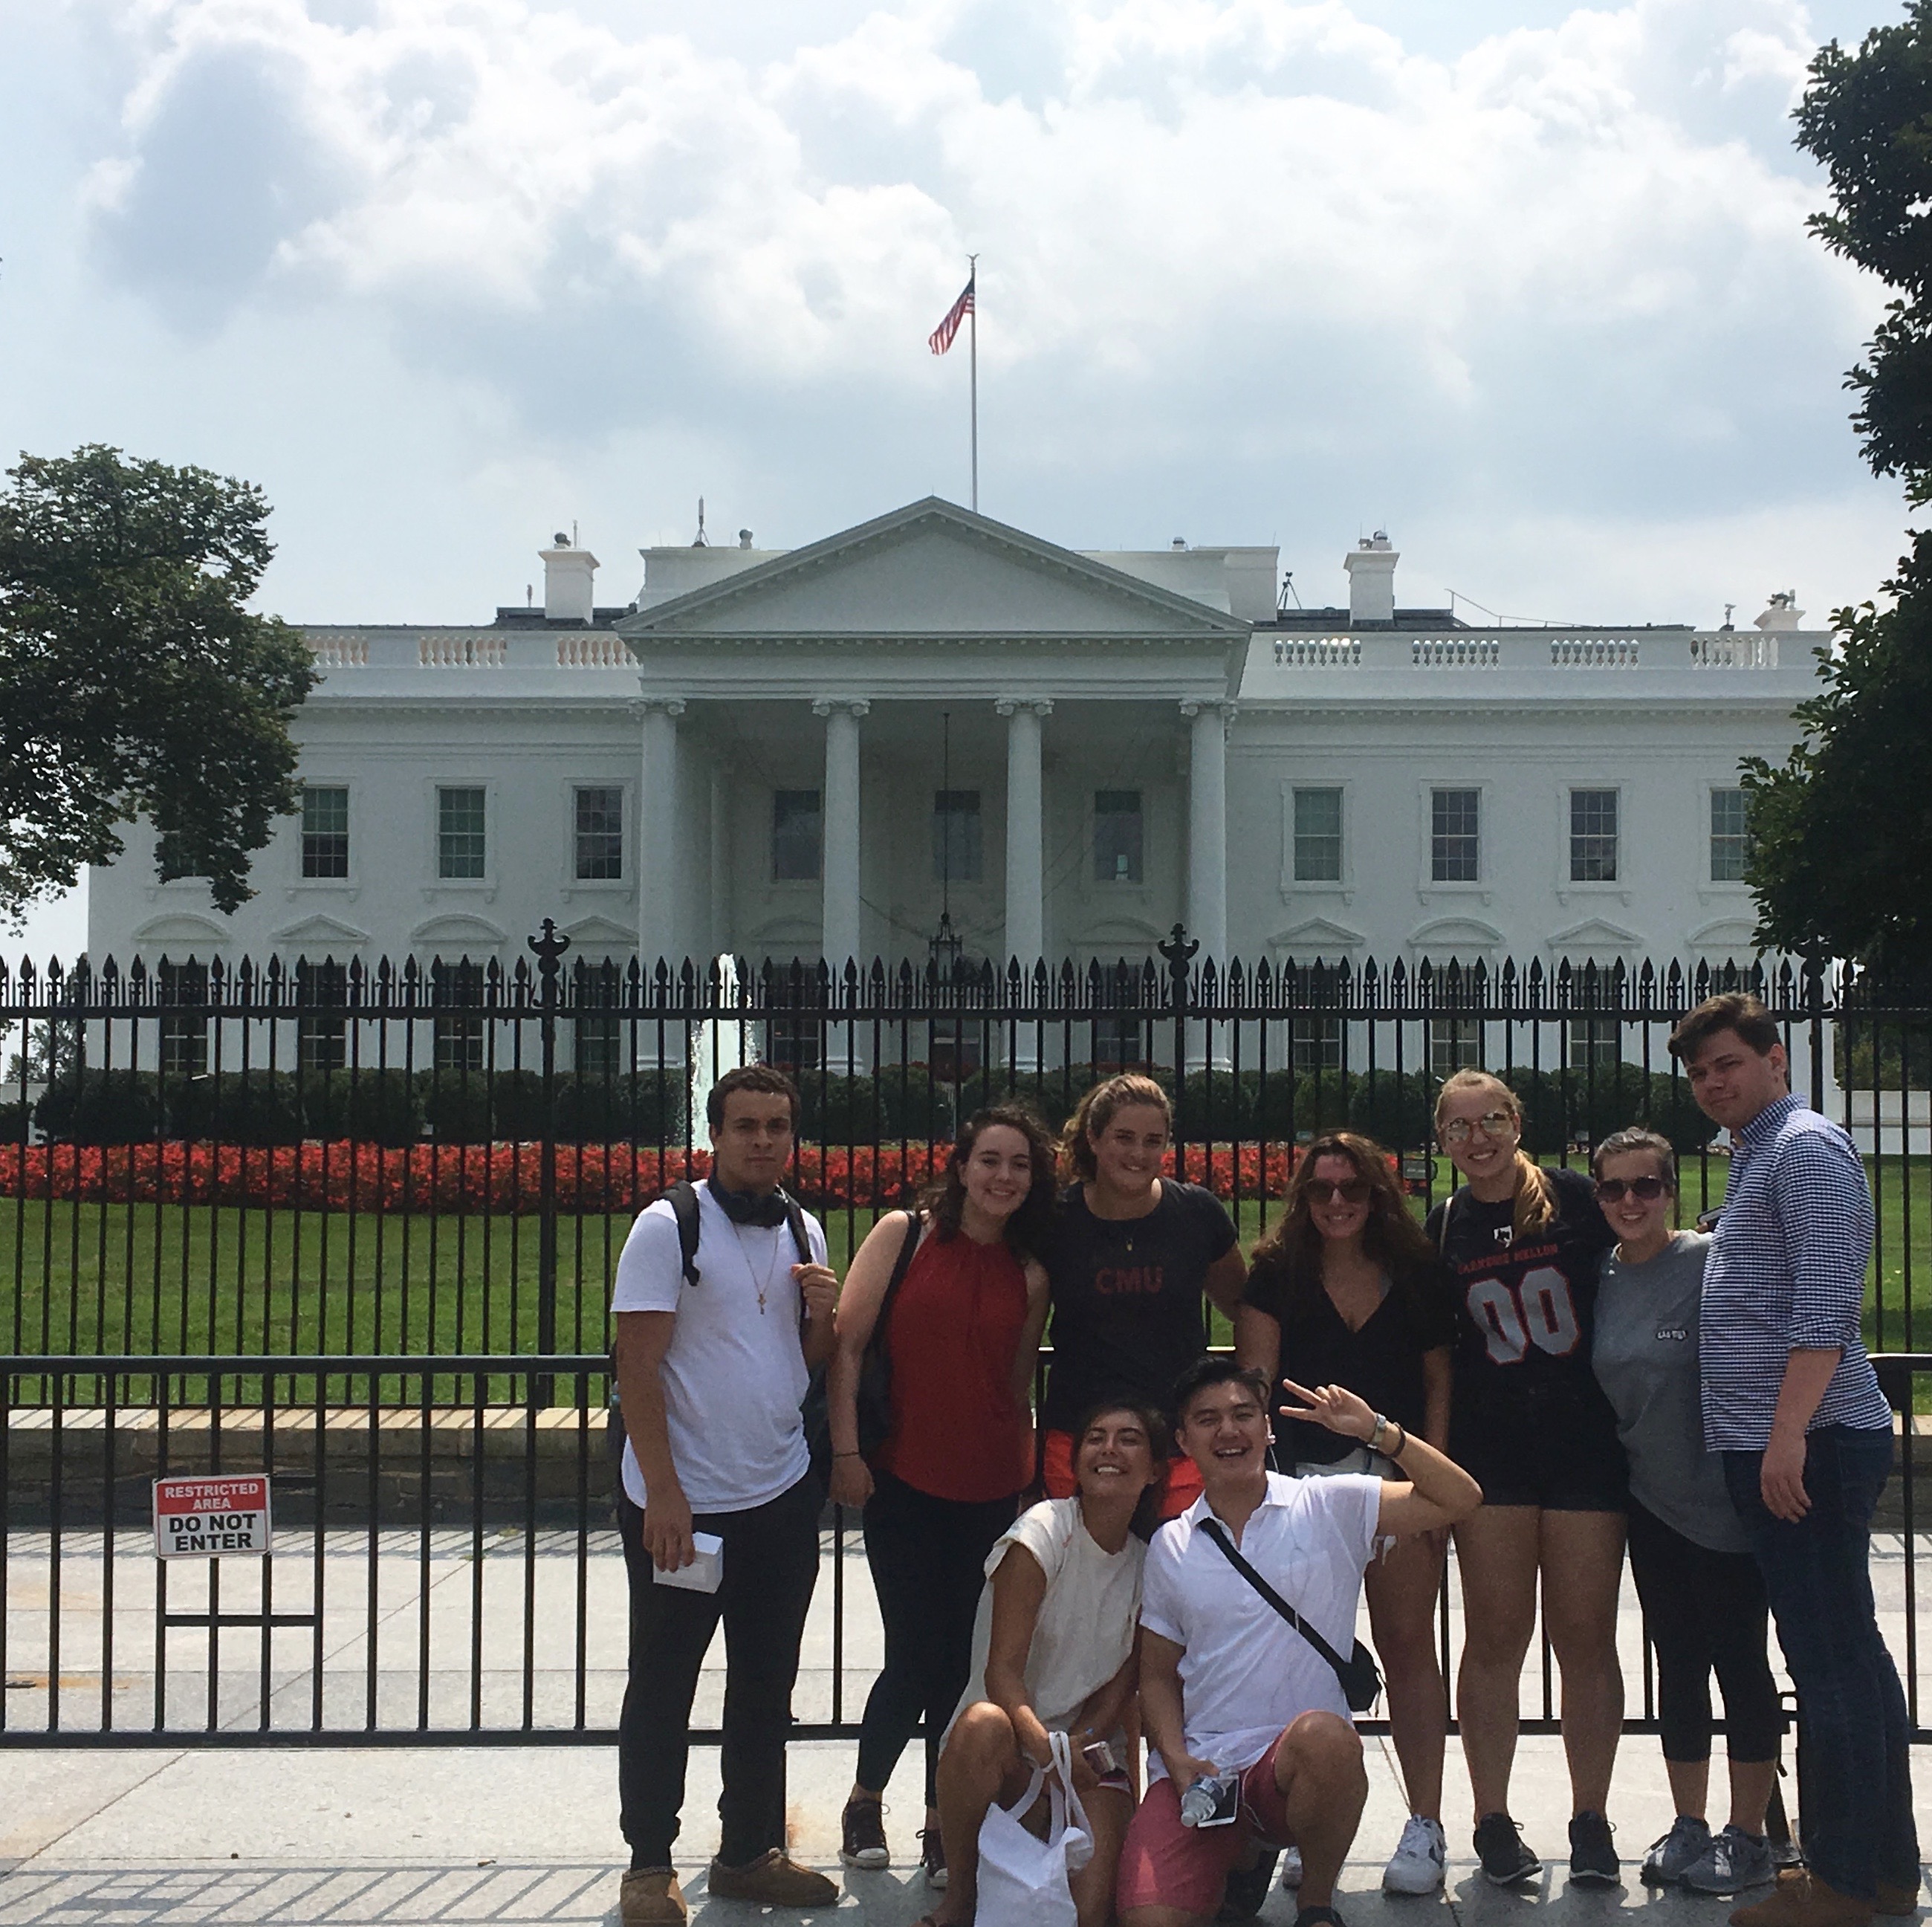 Students pose in front of the White House